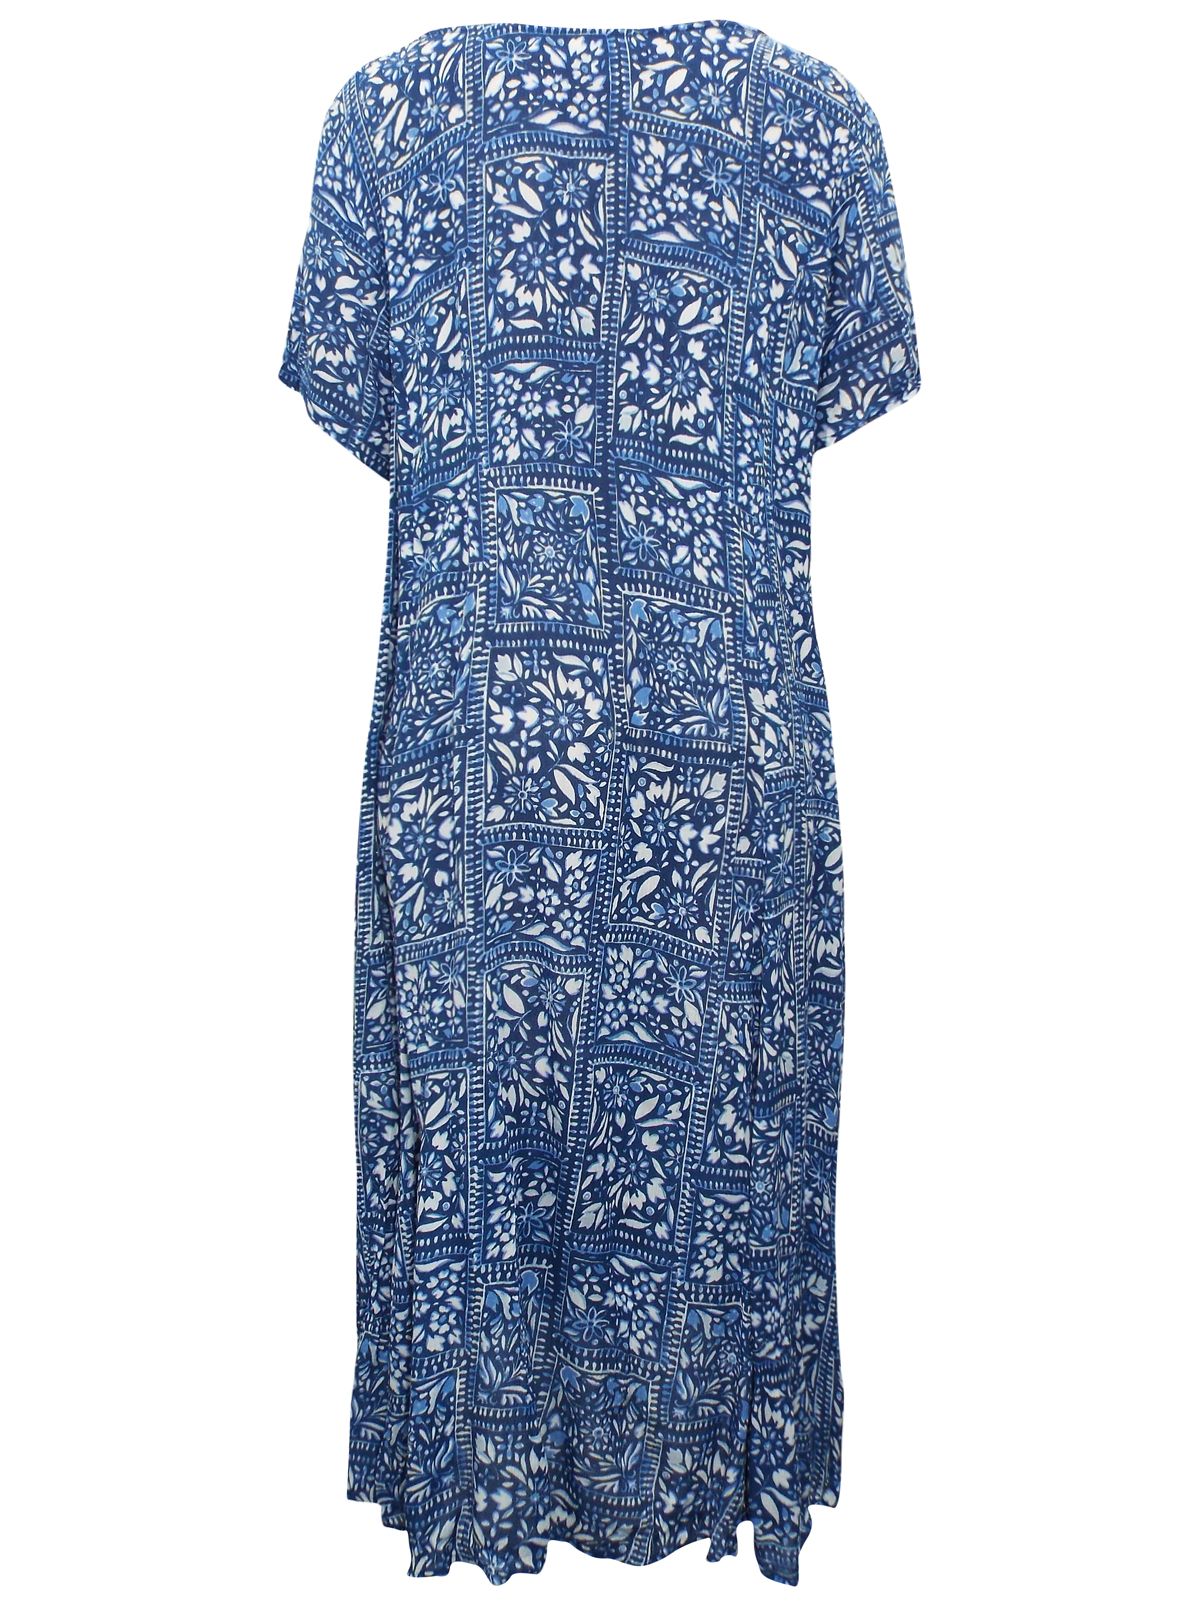 Woman Within - - Woman Within BLUE Printed Short Sleeve Sweep Hem ...